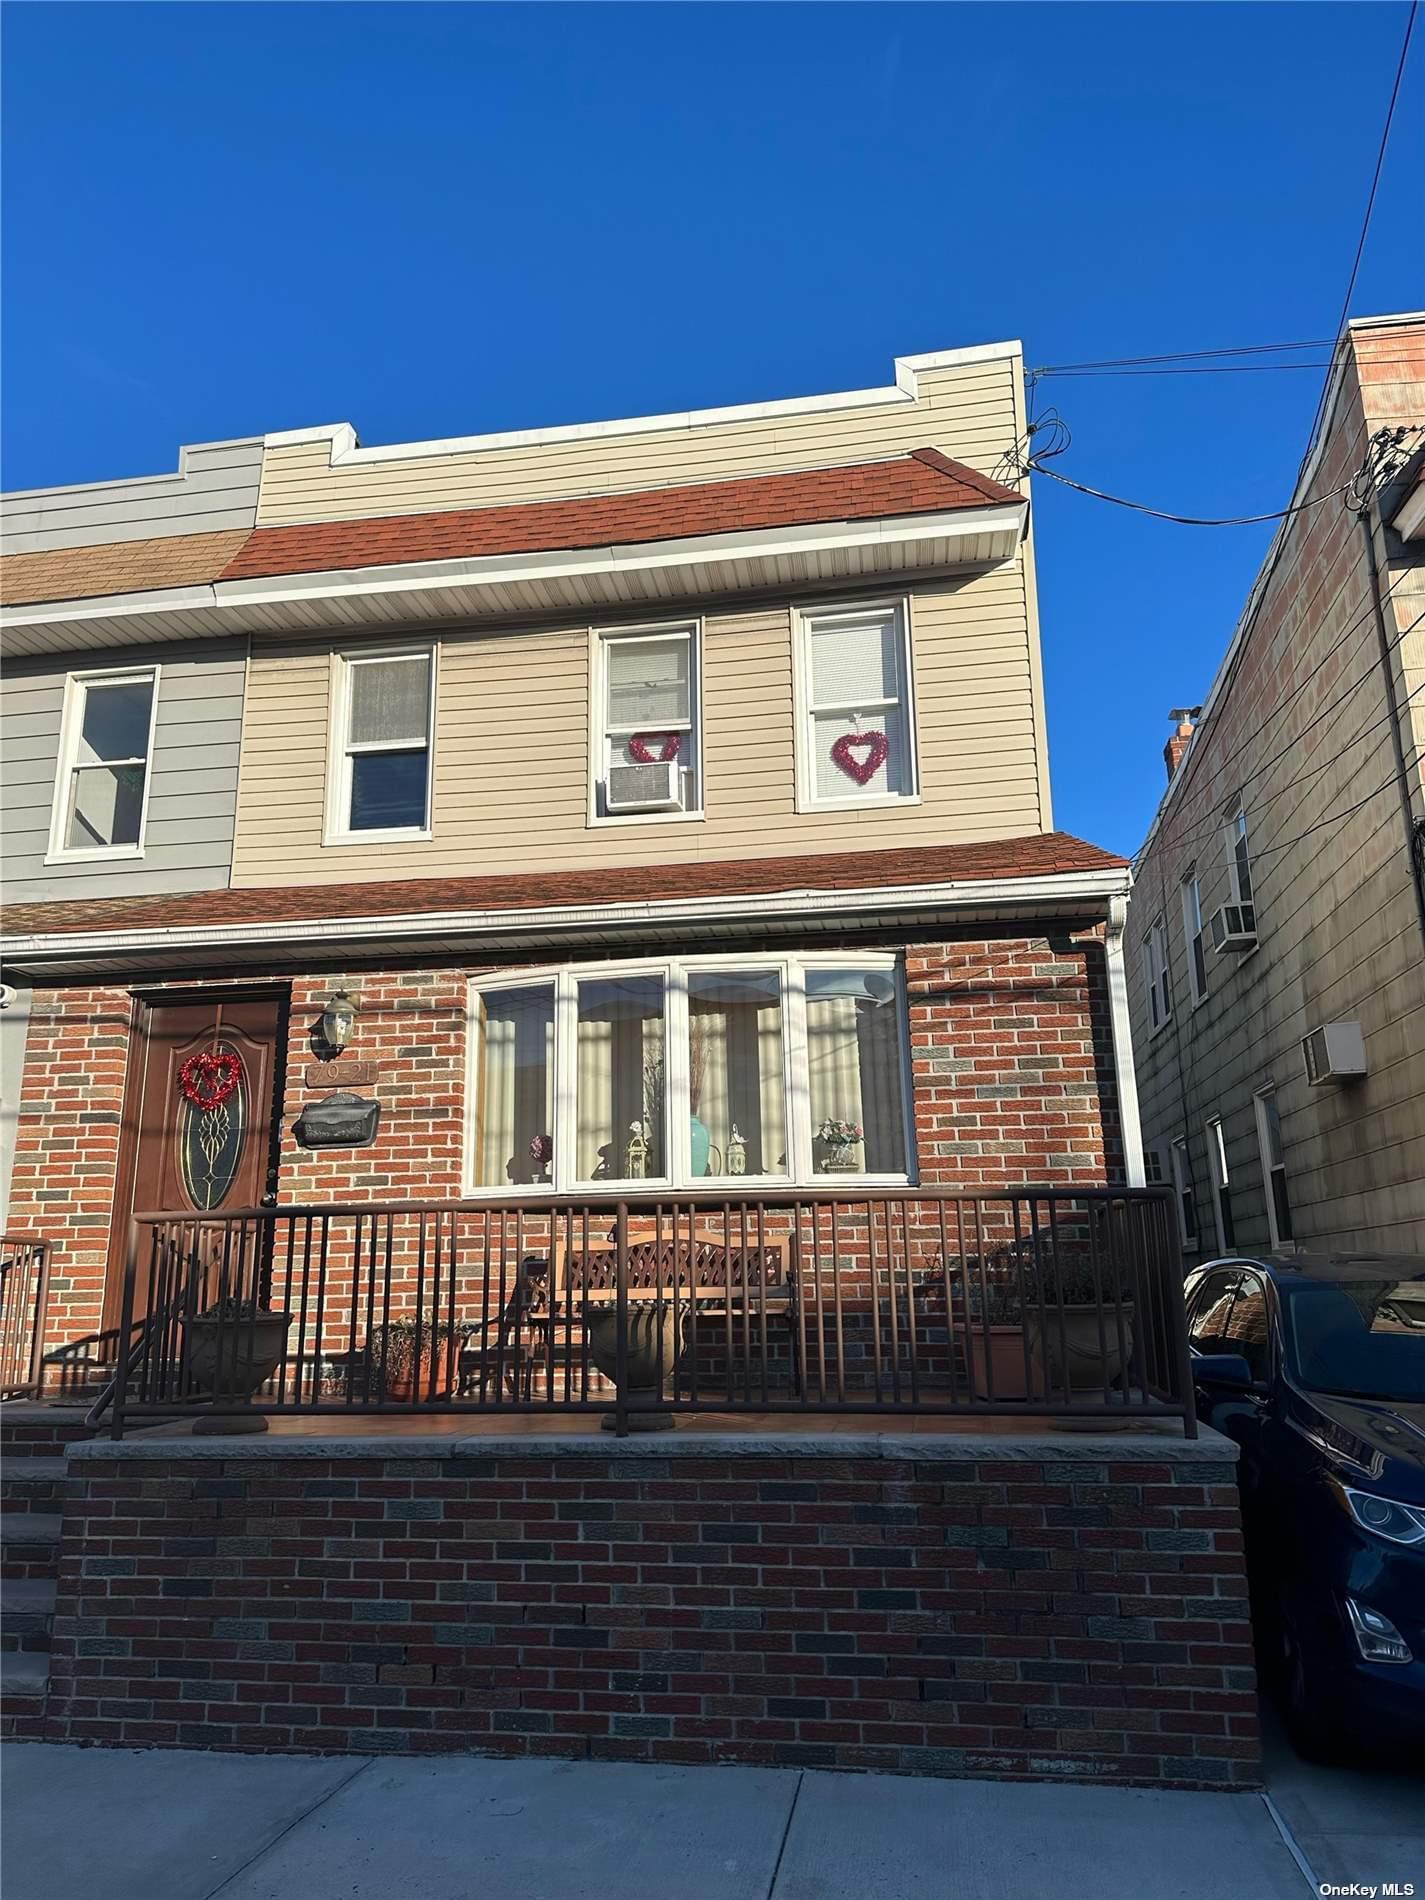 79-21 68th Road in Queens, Flushing, NY 11379